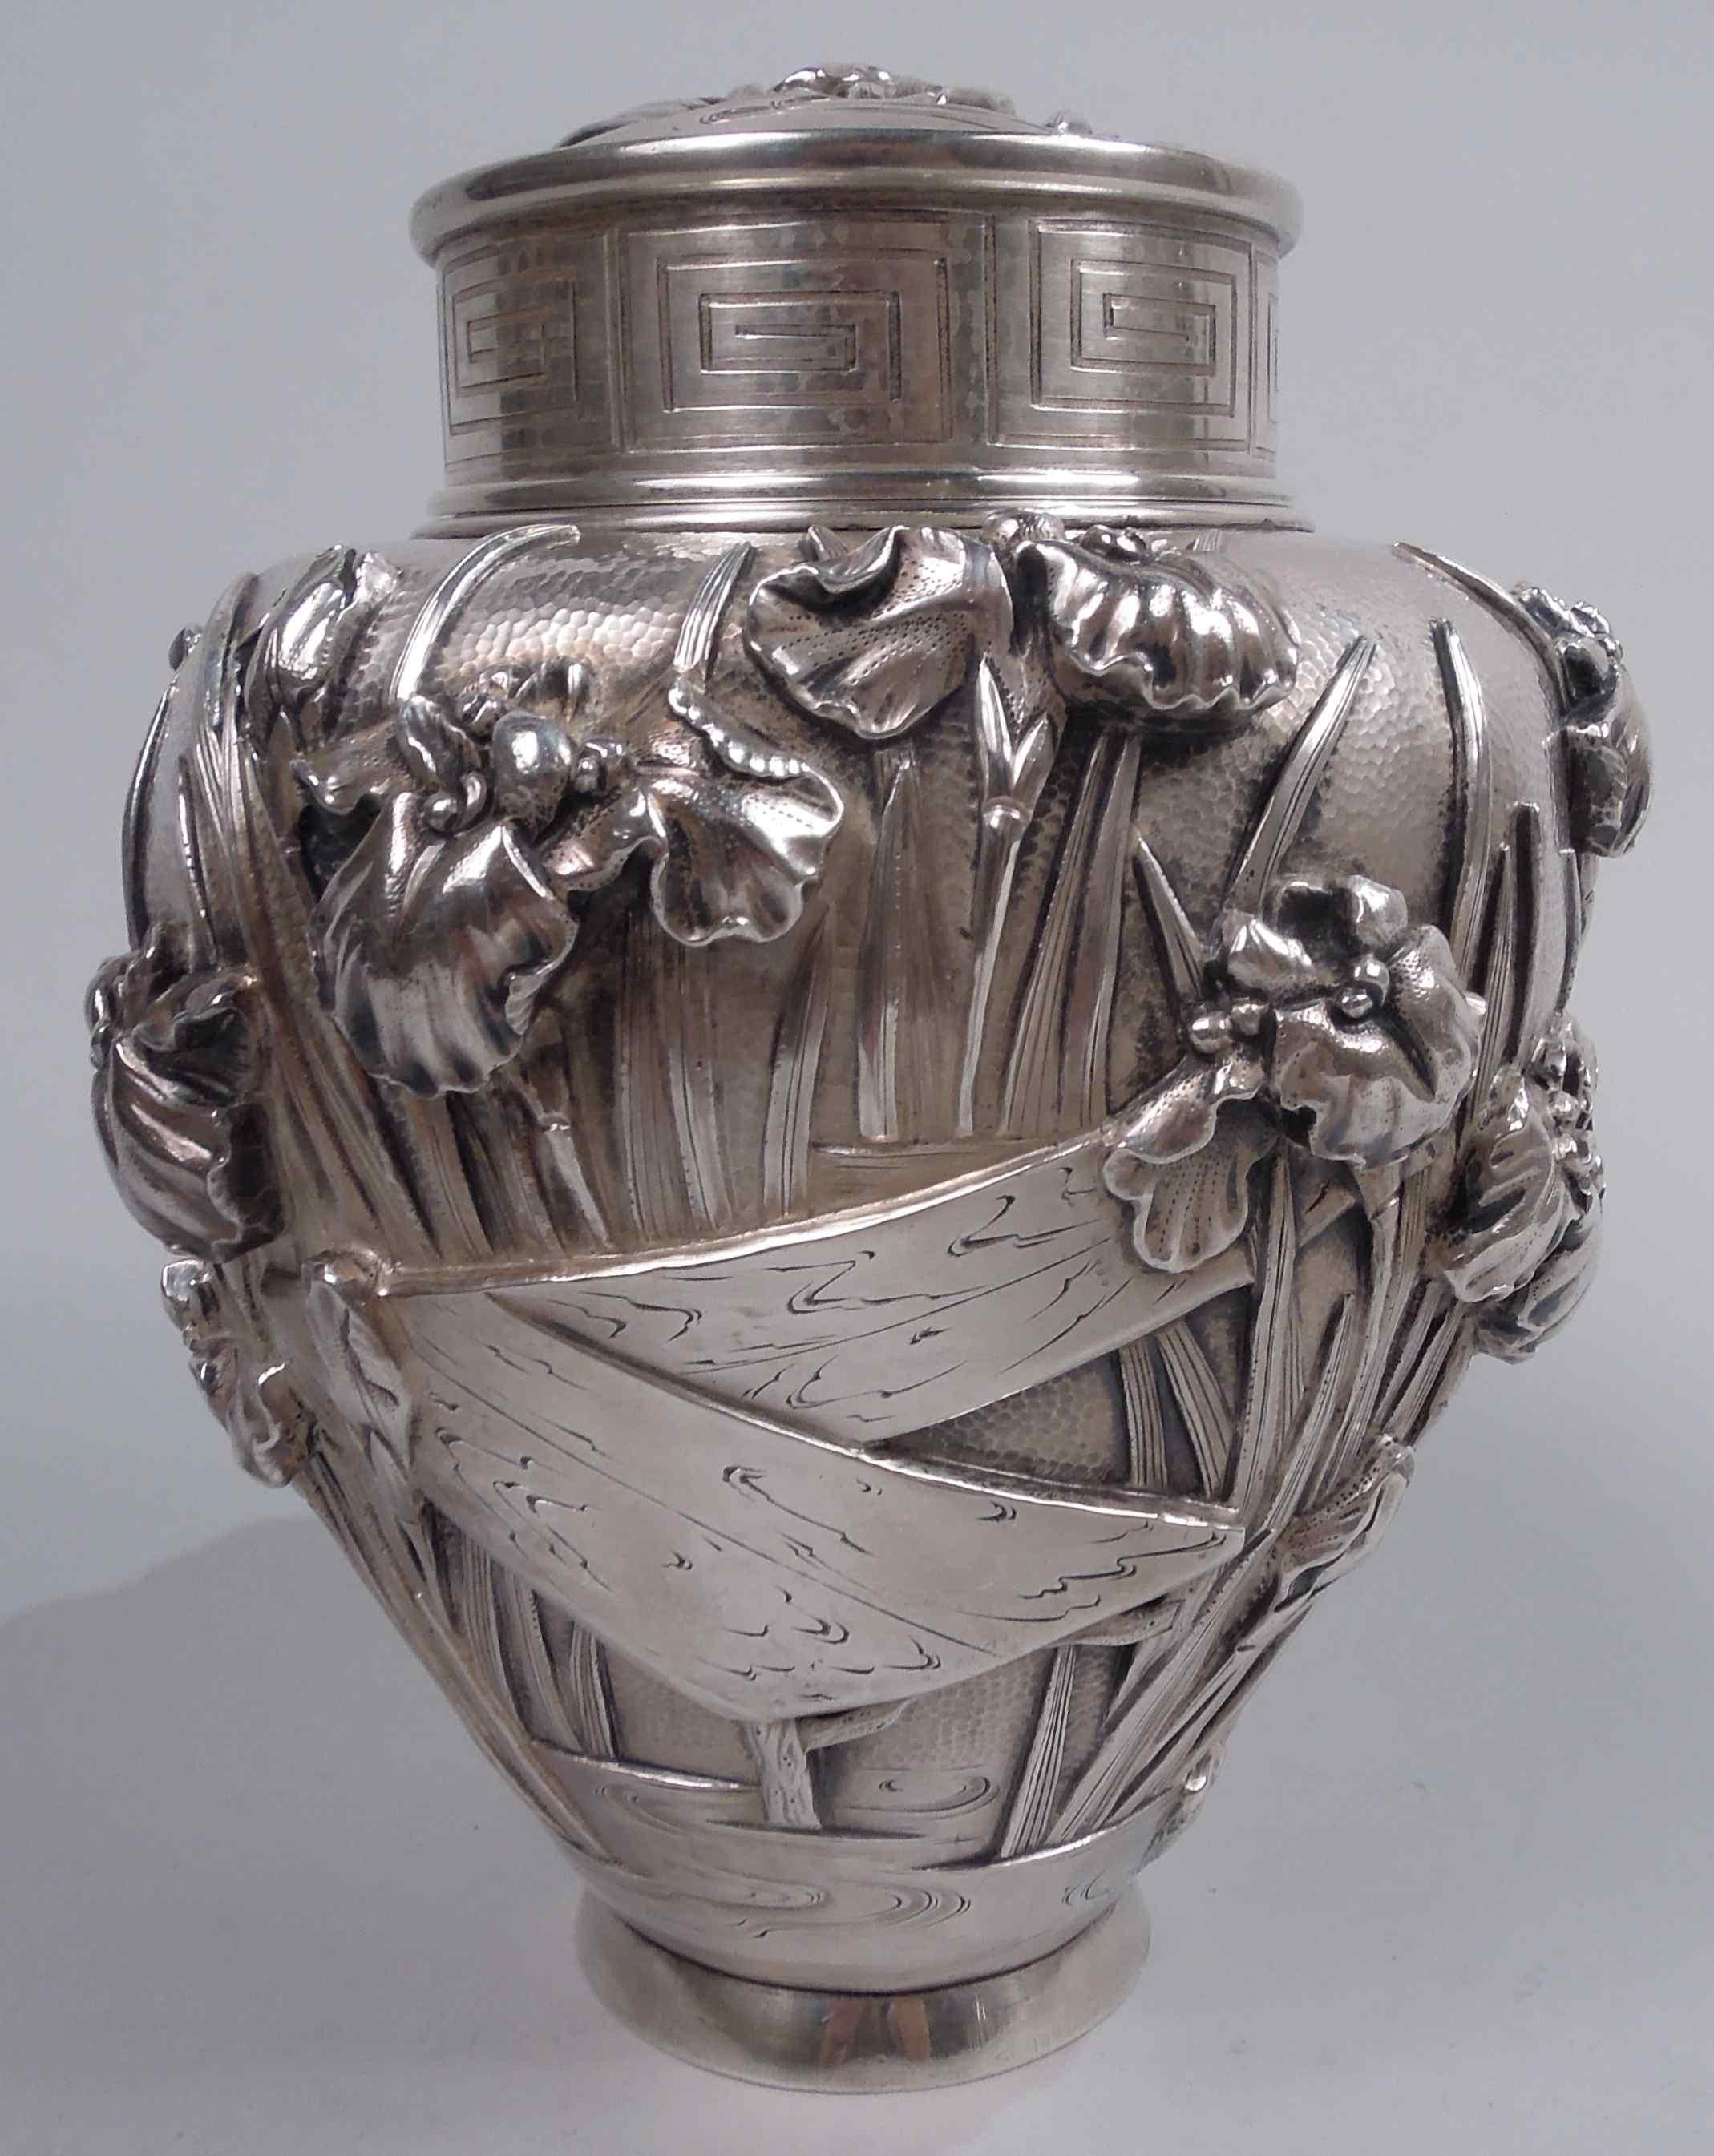 Japanese silver tea caddy, ca 1890. Ovoid; plain splayed foot and short neck and short inset neck. Applied and chased irises with floppy, irregular petals and reeded tendrils rooted in eddying water as well as baskets and wood staves; hand-hammered